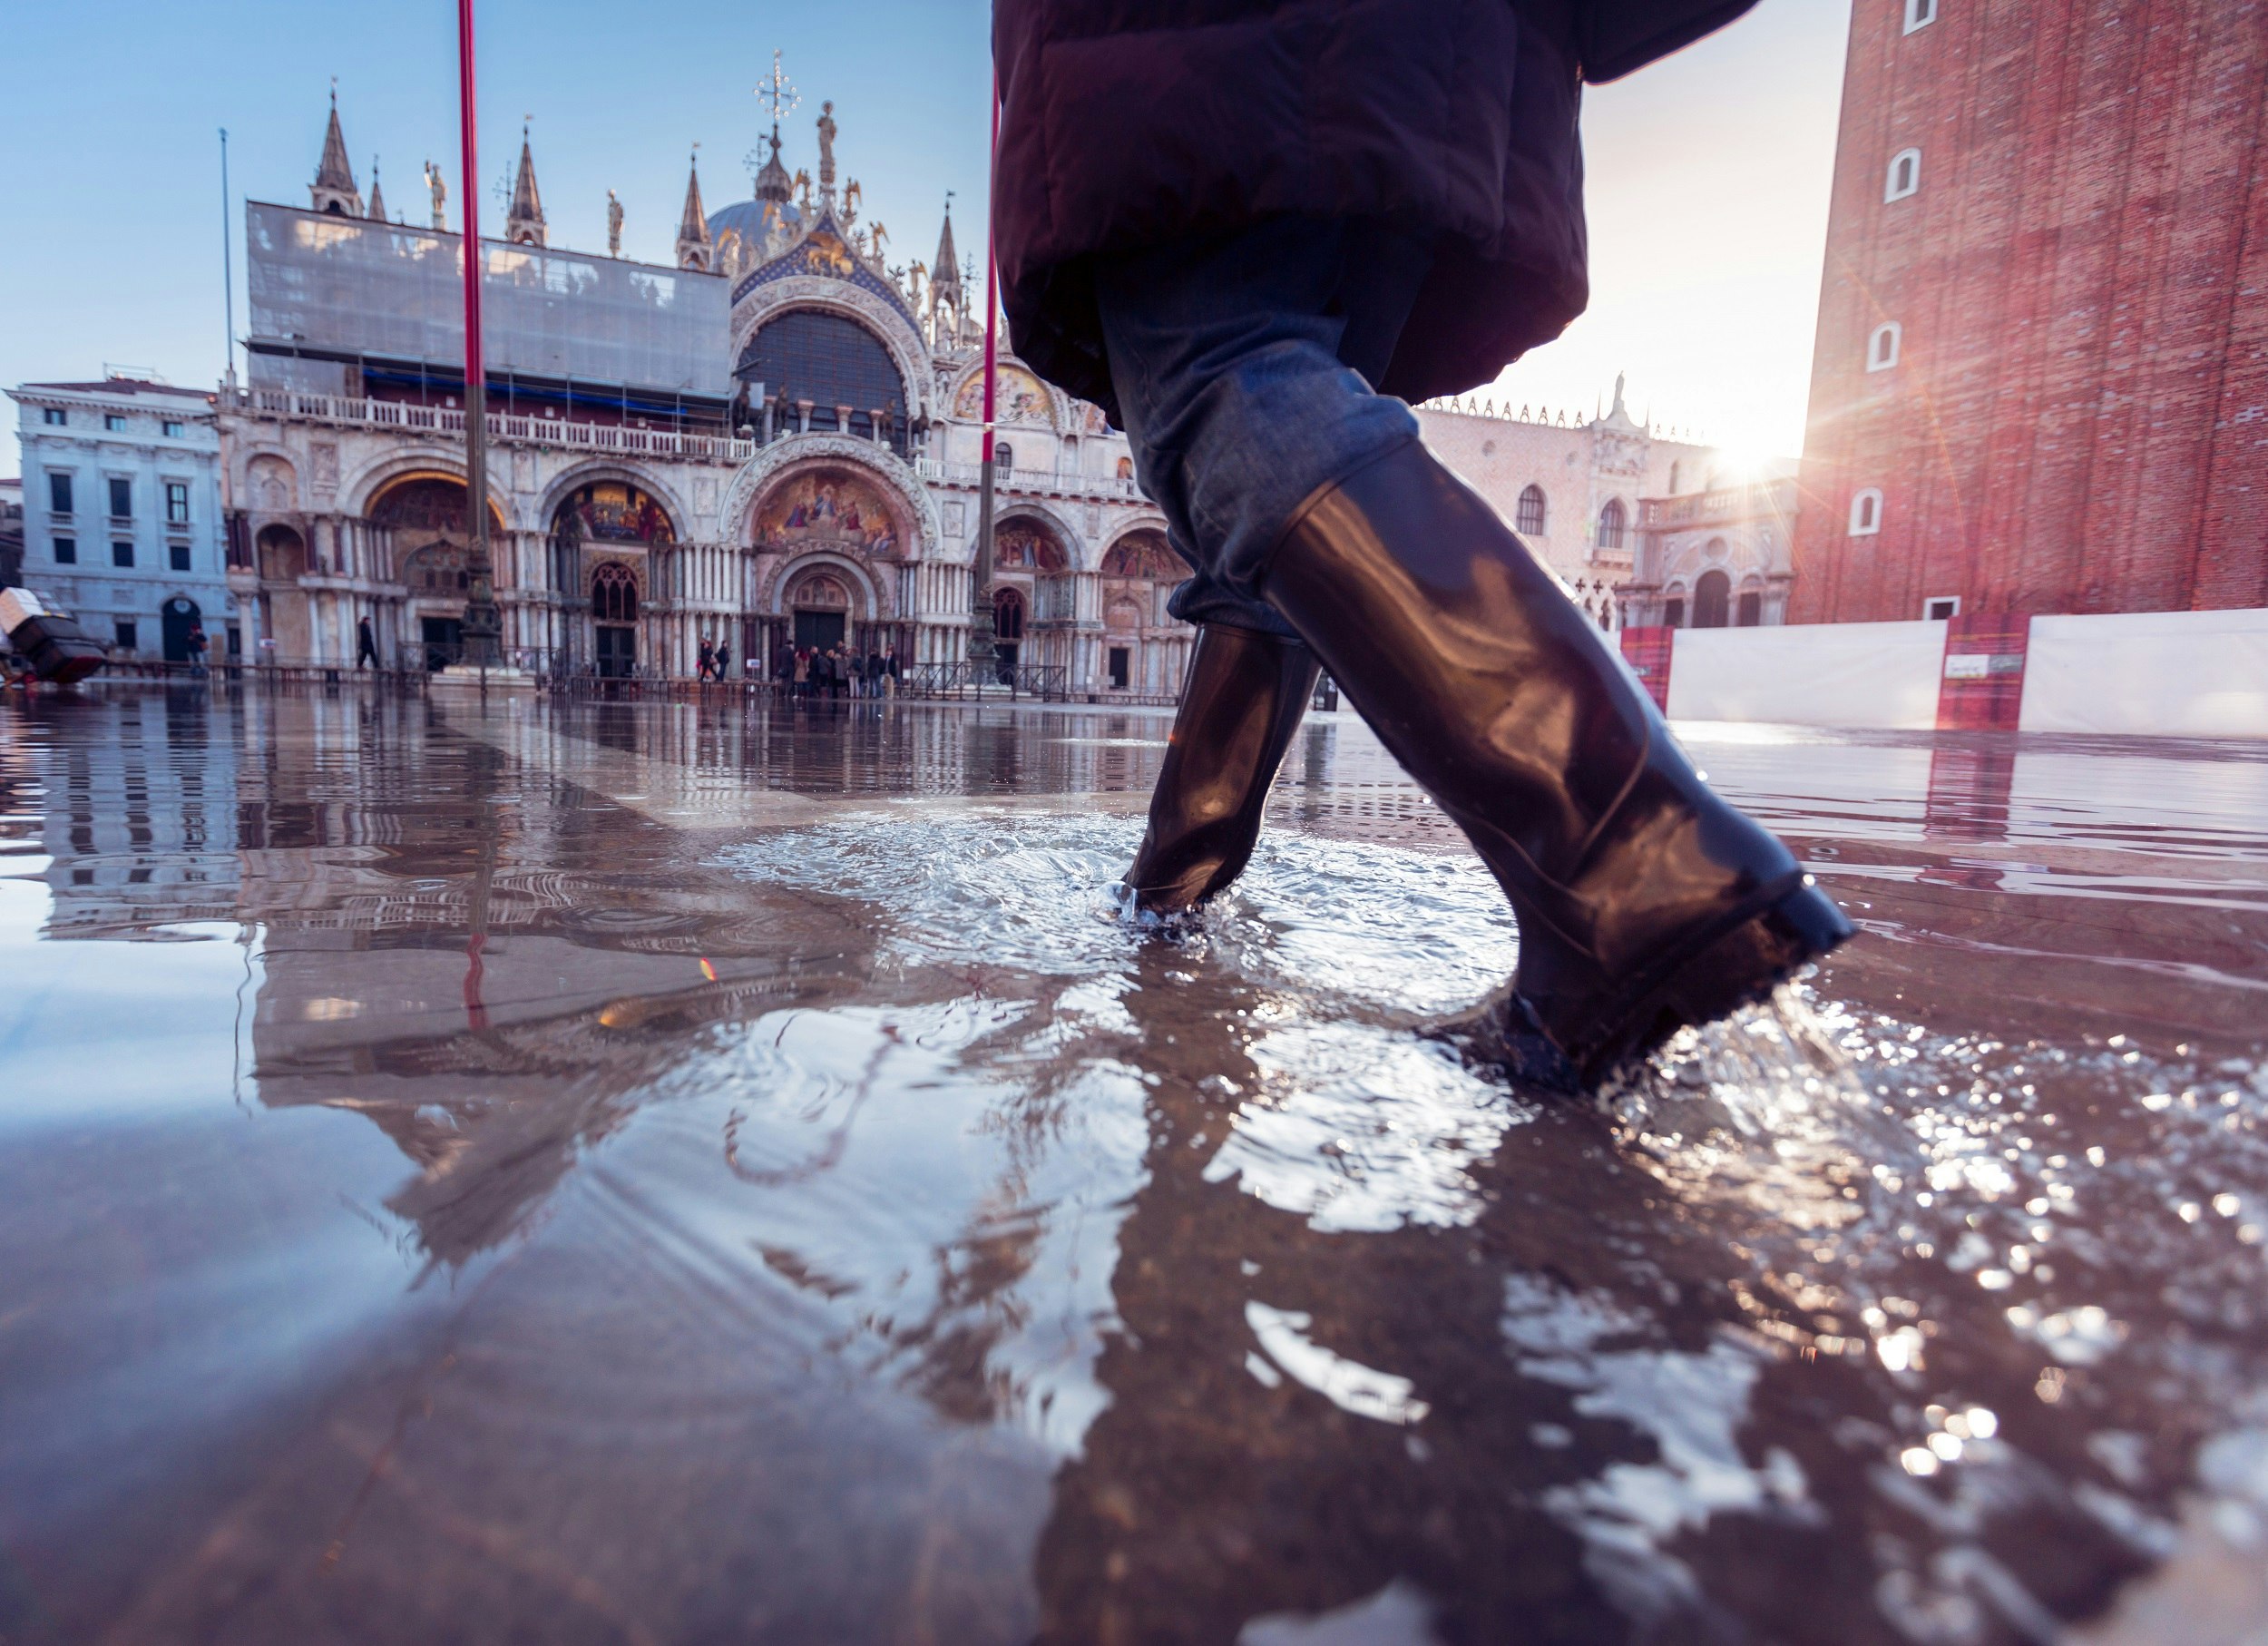 A person wearing rubber boots strides through floodwater walking towards an ornate building on the edge of a large square